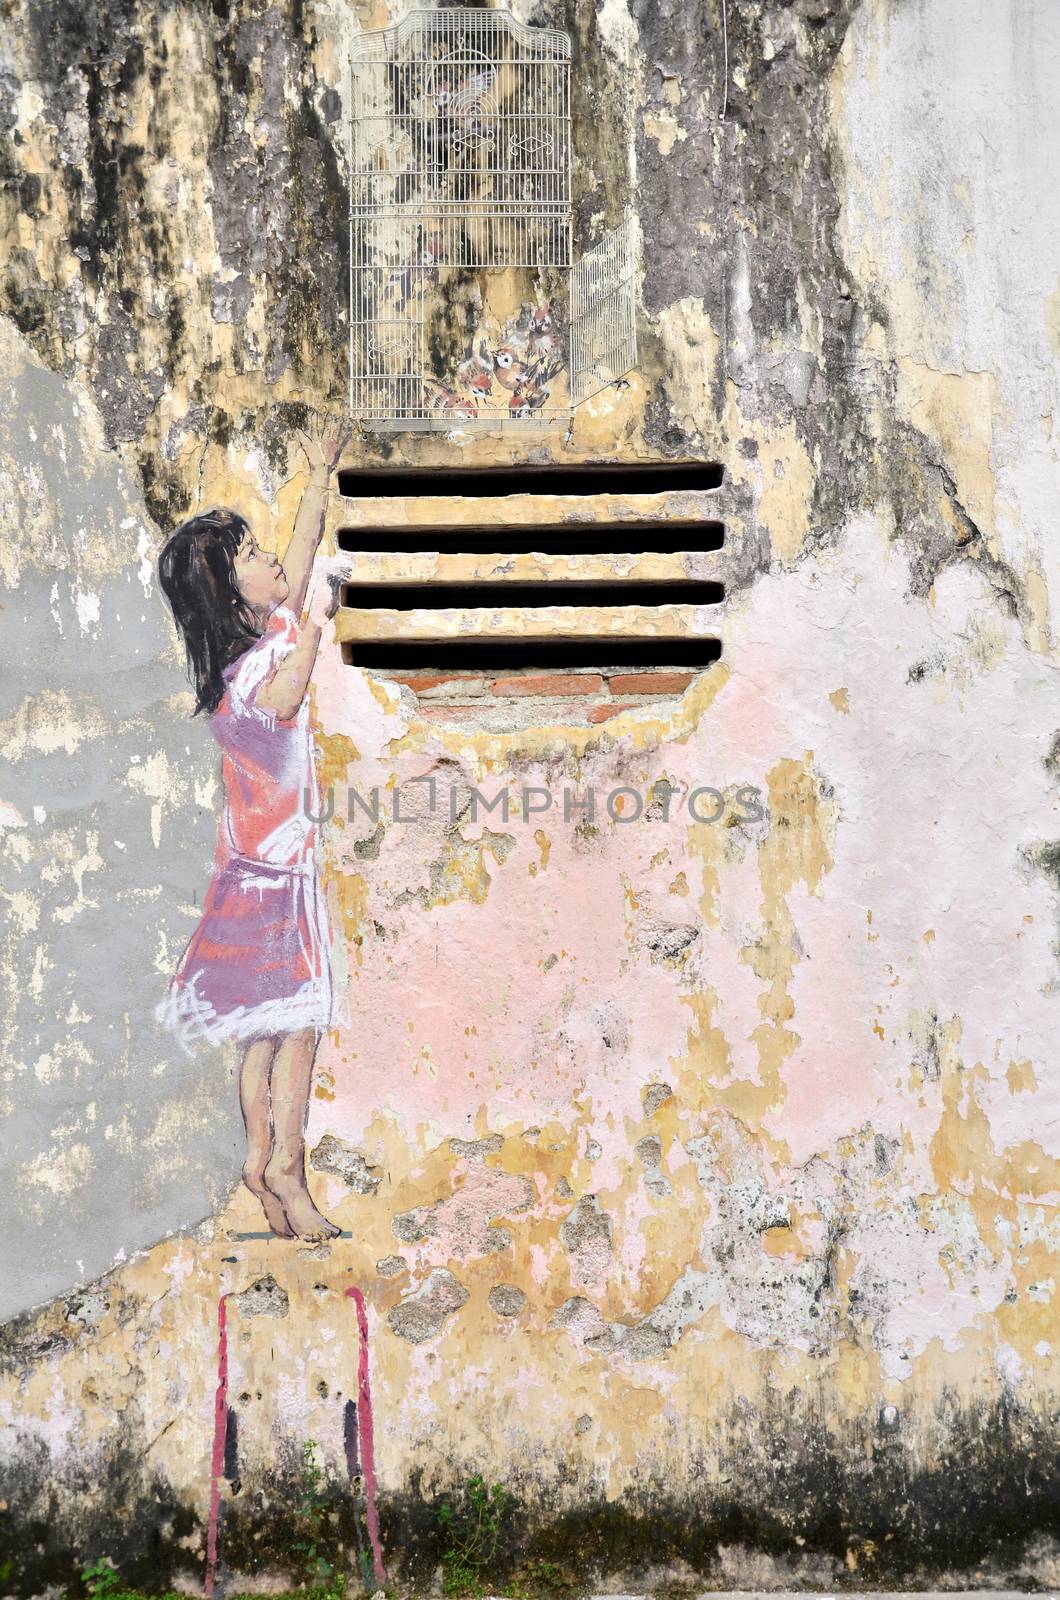 IPOH, MALAYSIA - 25 NOV 2015: Girl painted by Ernest Zacharevic in Ipoh.